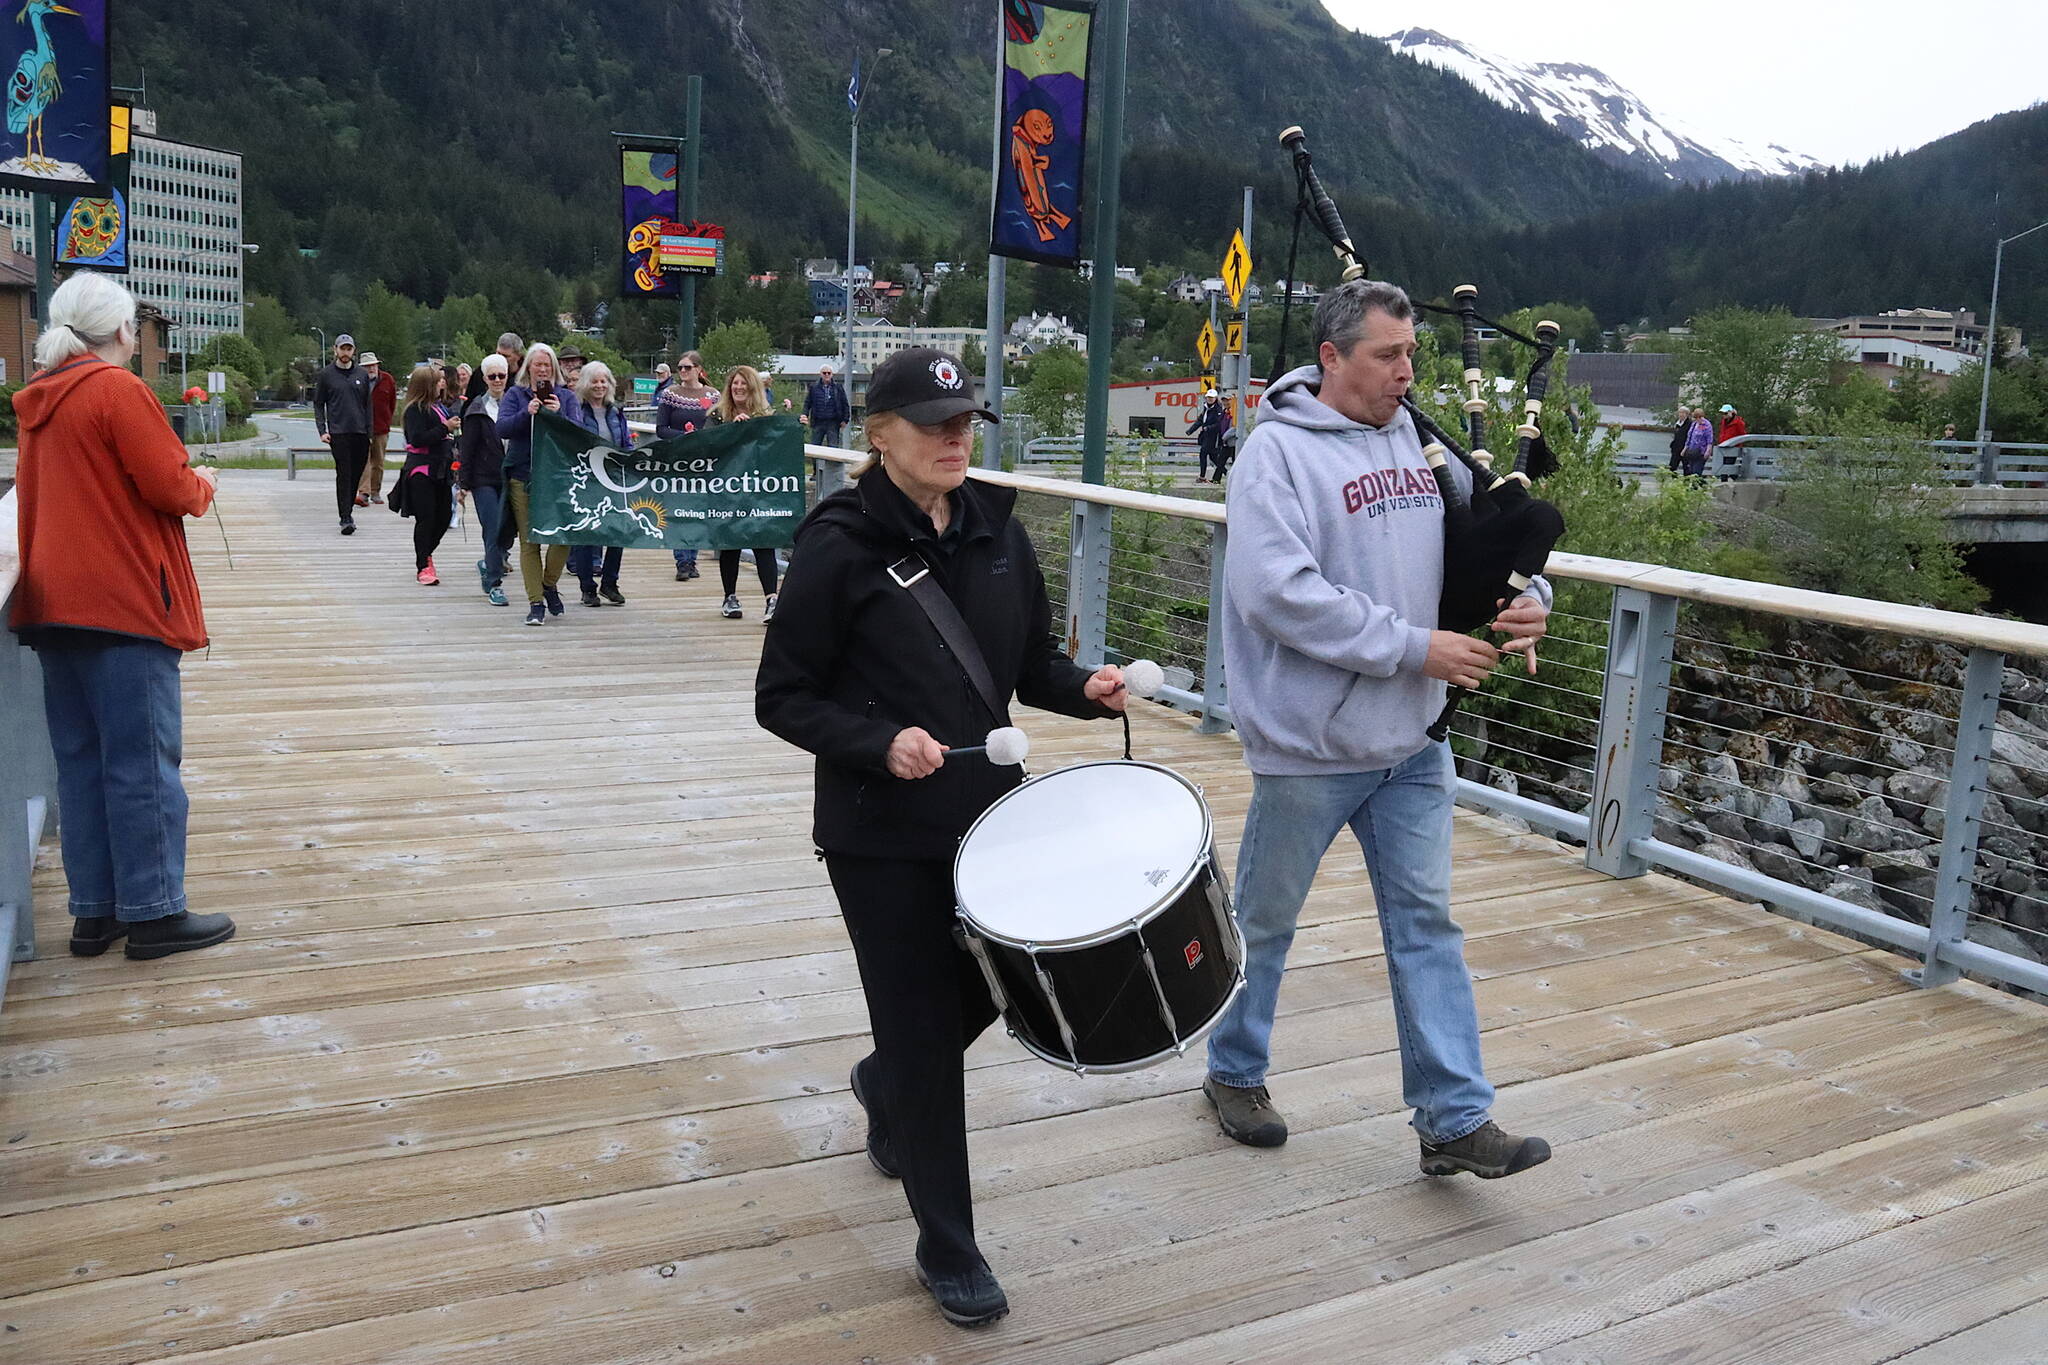 City of Juneau Pipe Band members Sue Behnert and Scott Mornon lead participants along the downtown Juneau waterfront to Bill Overstreet Park during the annual Celebration of Life Walk on Sunday, June 2, which is National Cancer Survivors Day. (Mark Sabbatini / Juneau Empire)